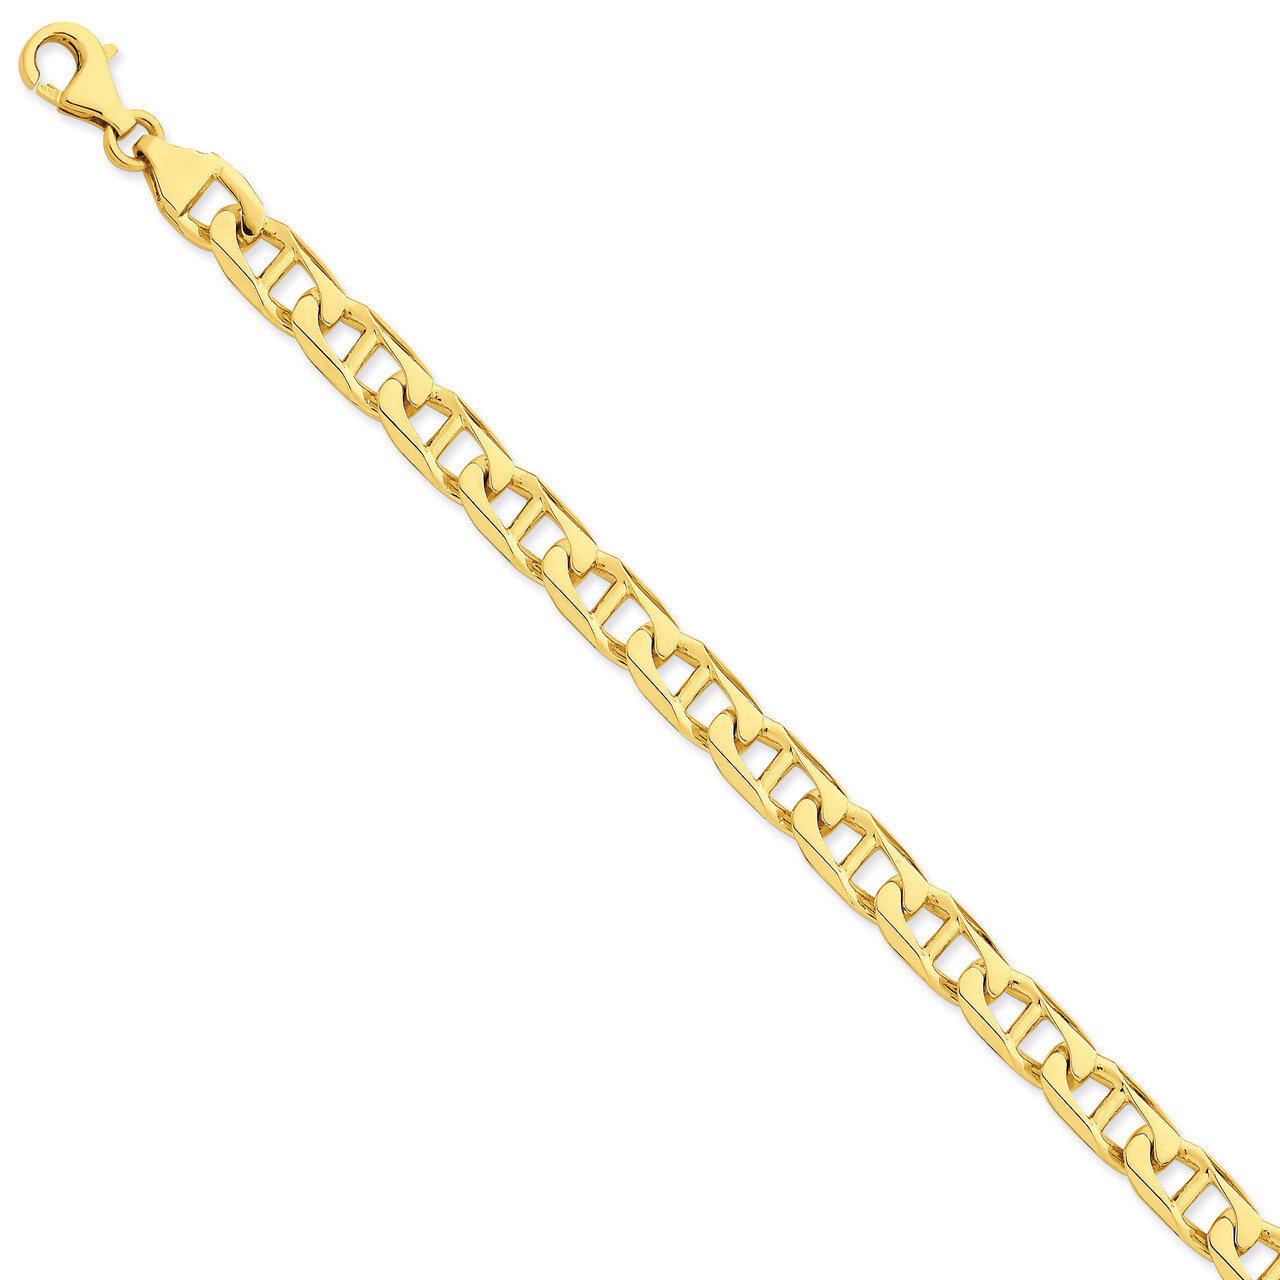 9mm Hand-Polished Anchor Link Chain 9 Inch 14k Gold LK101-9